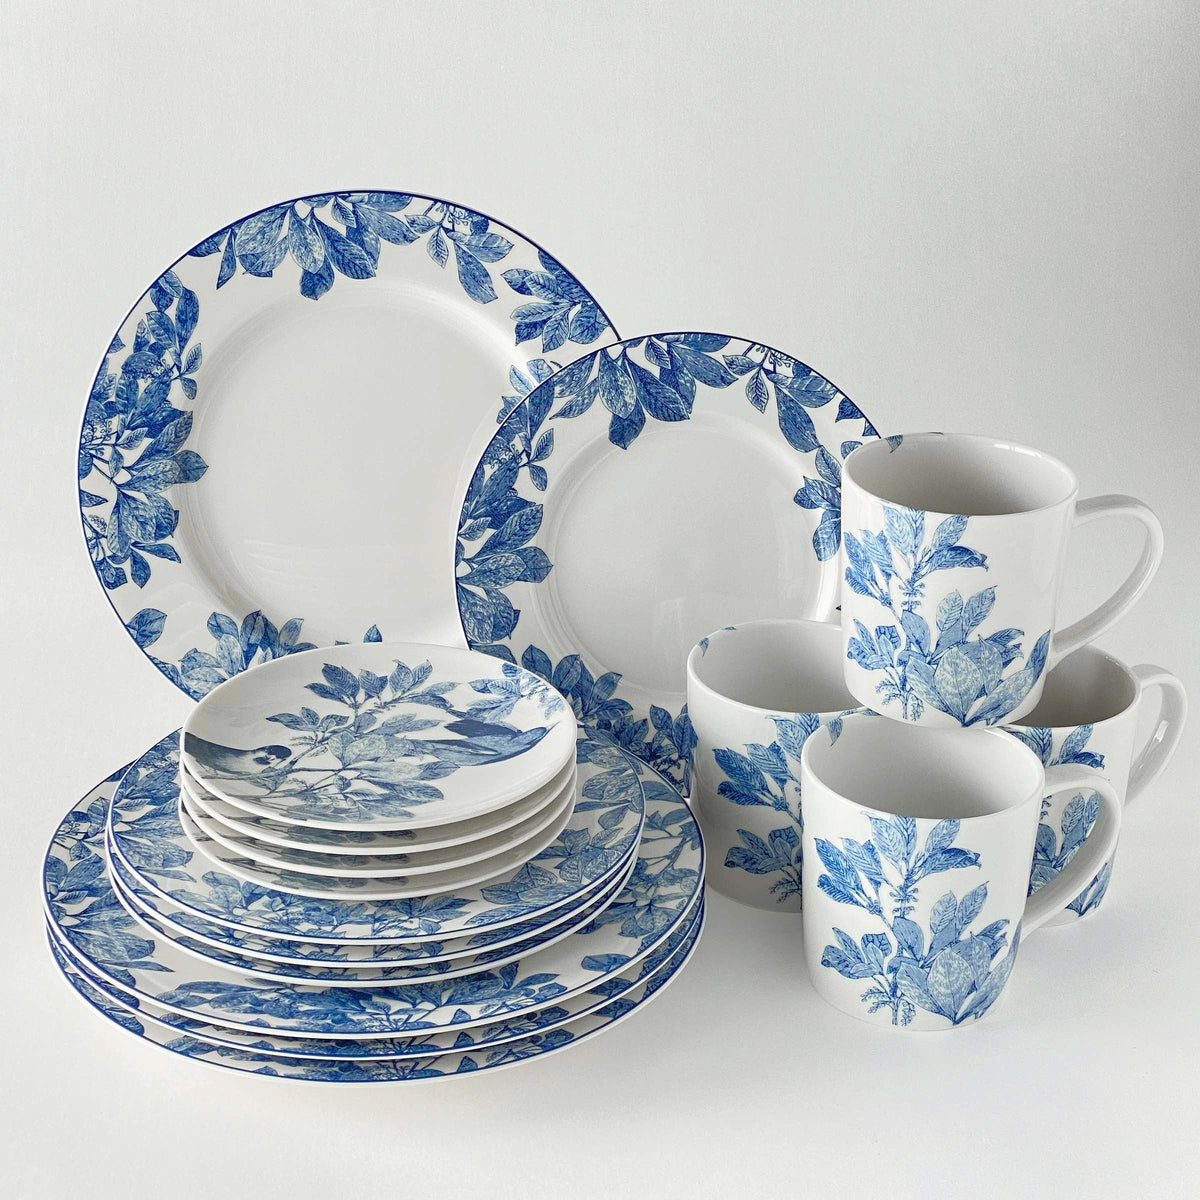 An Arbor Blue Birds Small Plates set from Caskata Artisanal Home, featuring heirloom-quality dinnerware with intricate botanical details, includes plates, bowls, and mugs arranged neatly against a white background.
